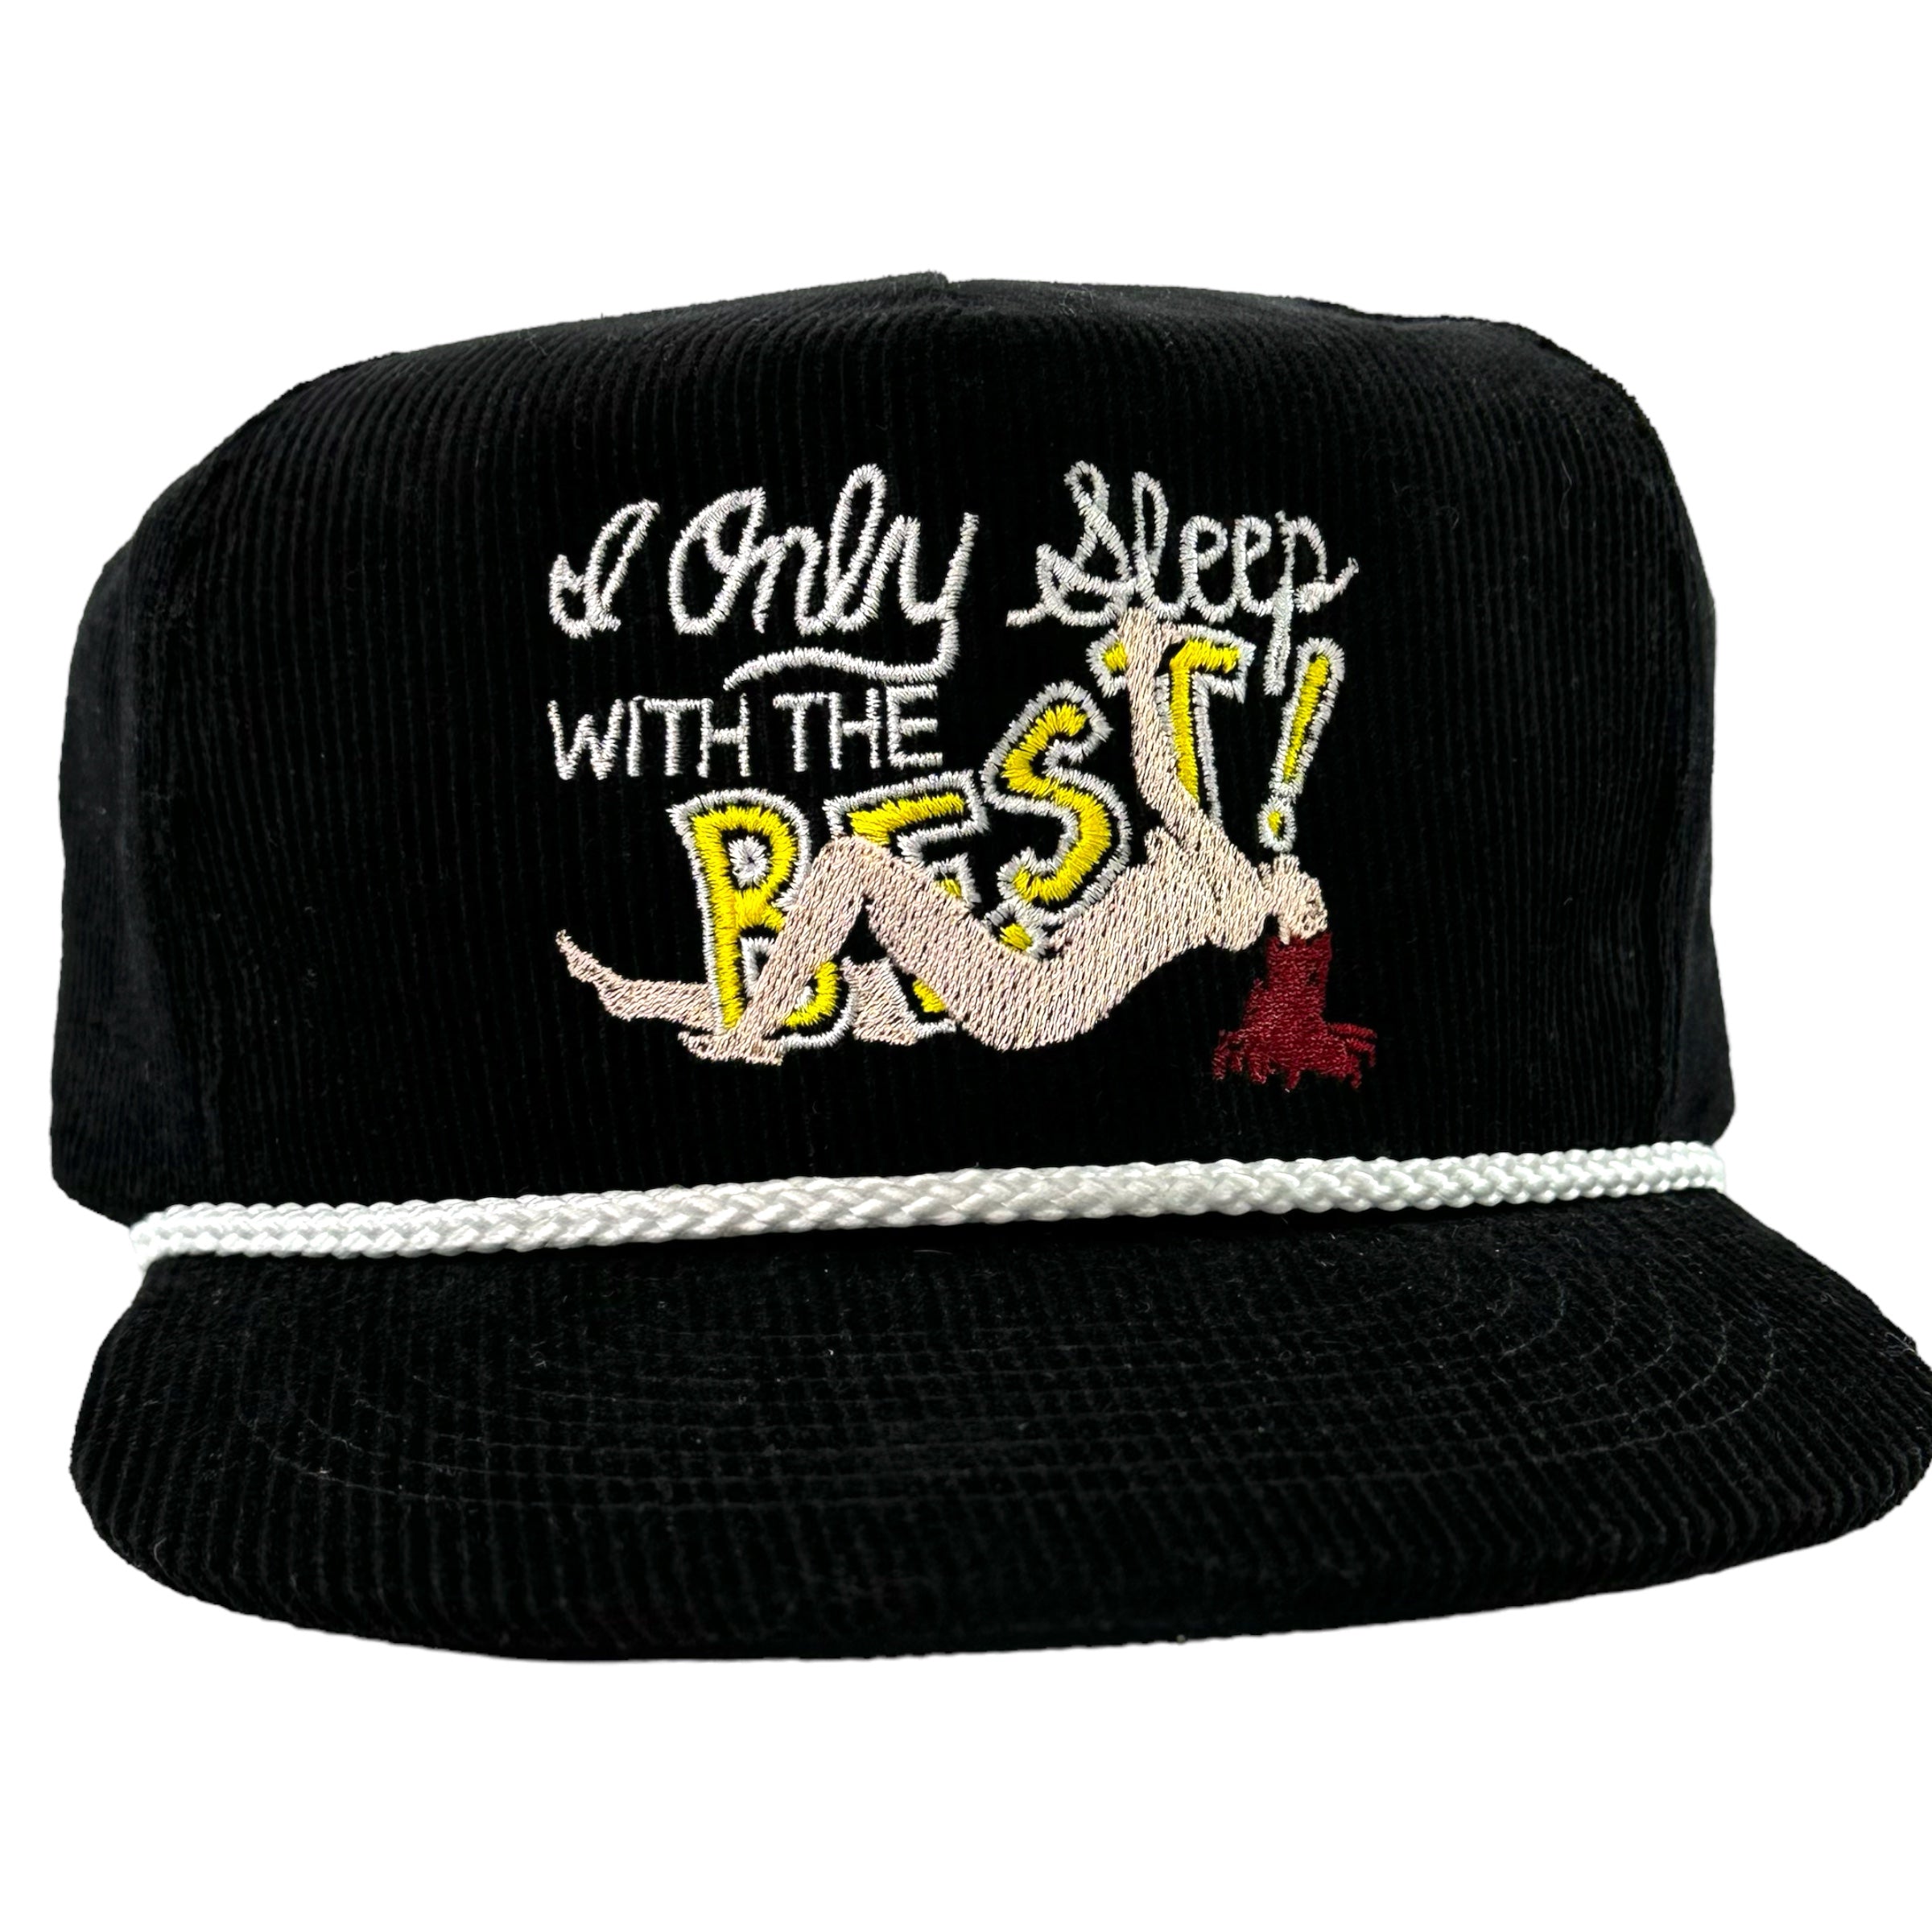 I ONLY SLEEP WITH THE BEST Funny Hat White Rope Black ￼ Corduroy